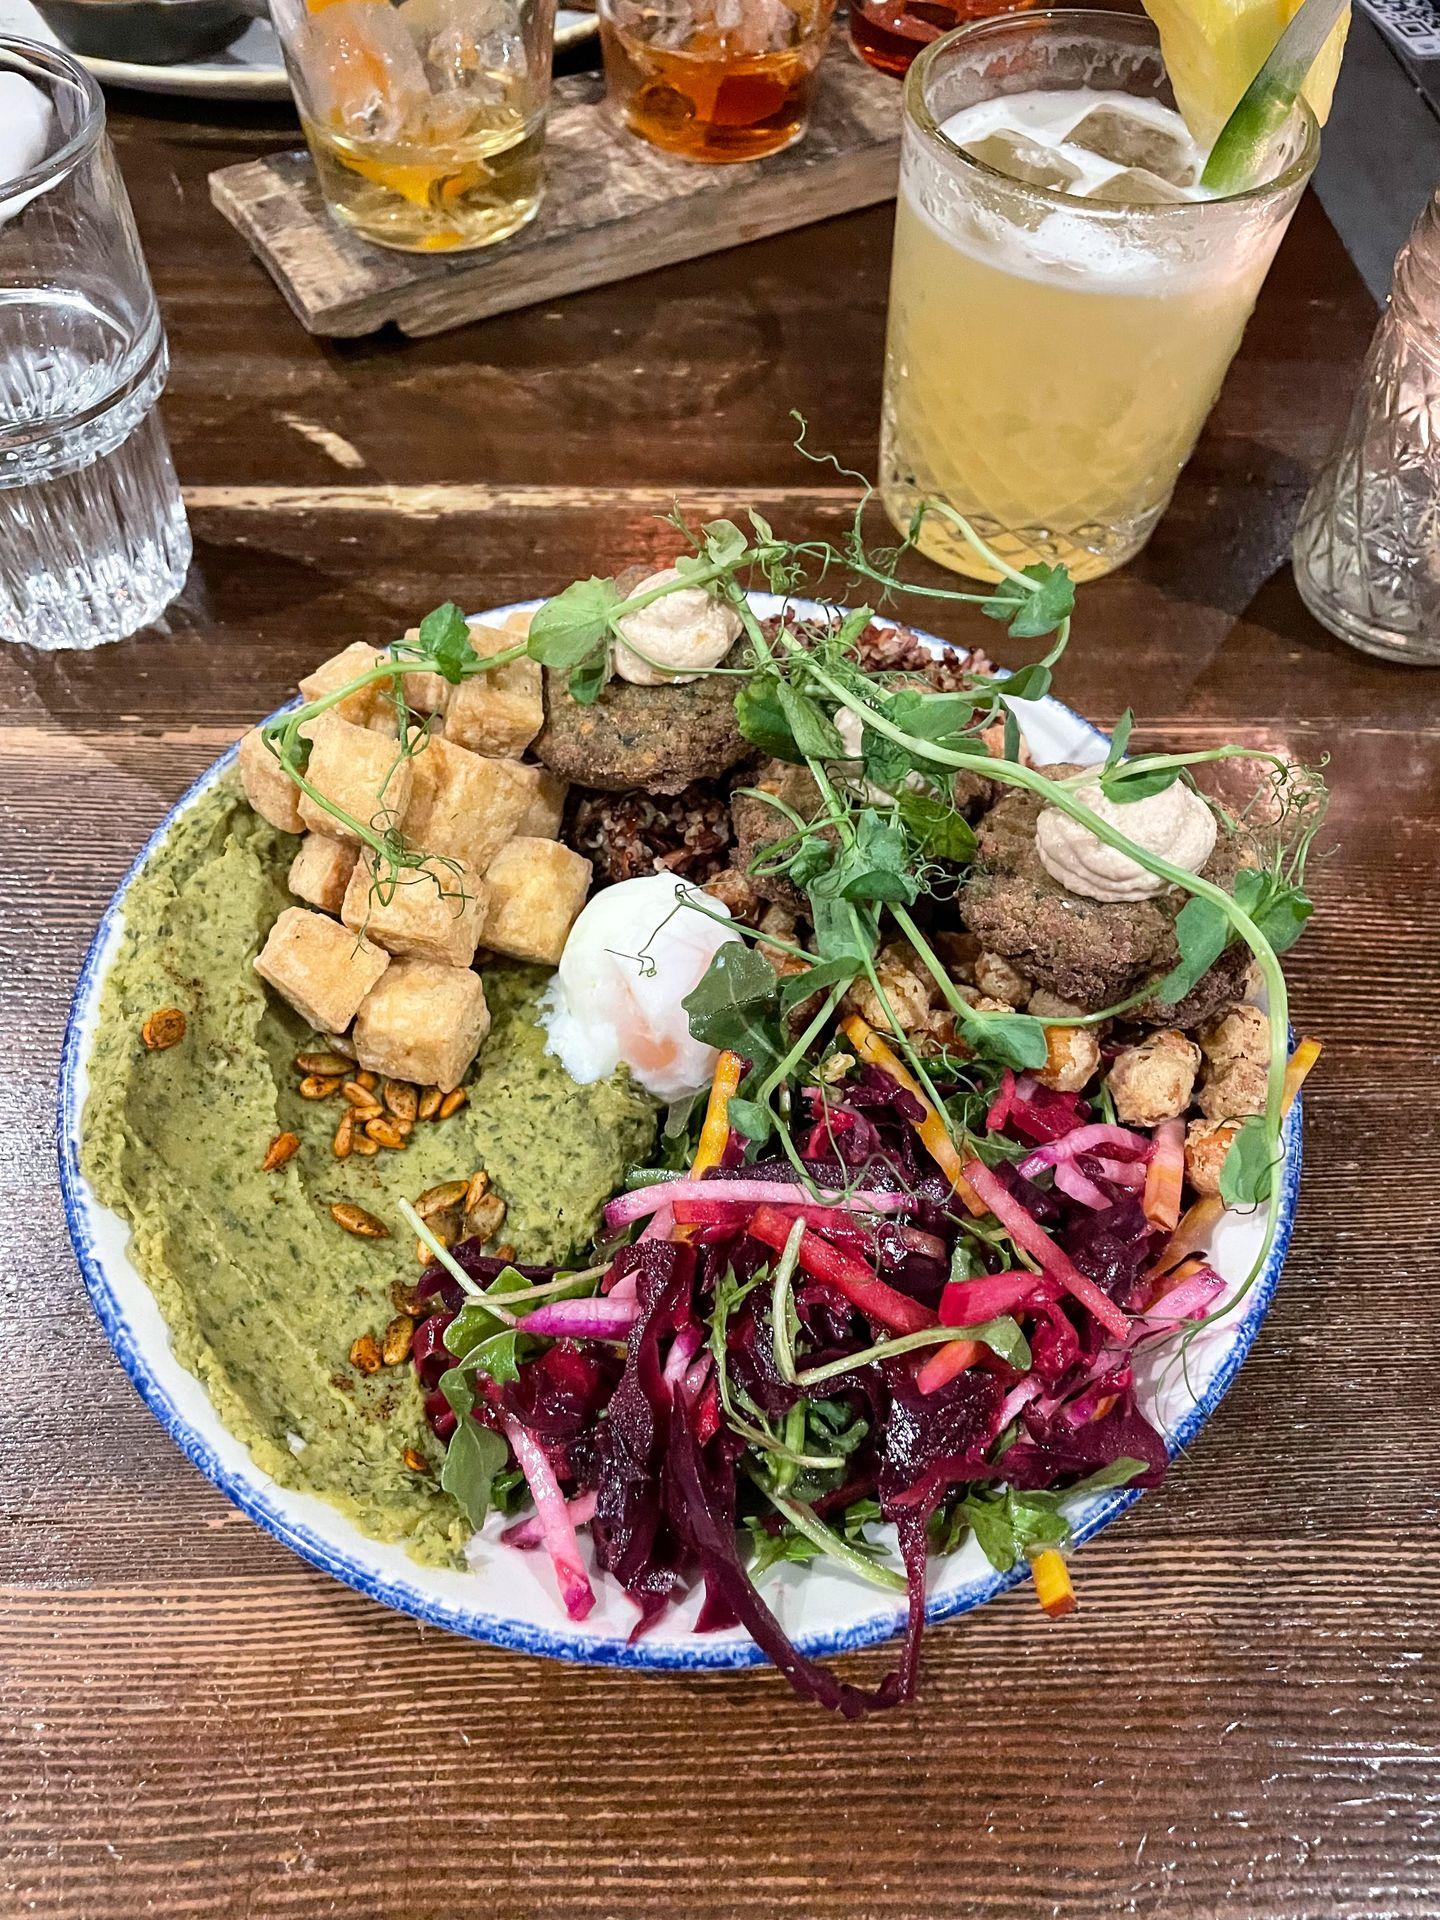 A plate of tofu, greens, veggies and more from Park Distillery in Banff.